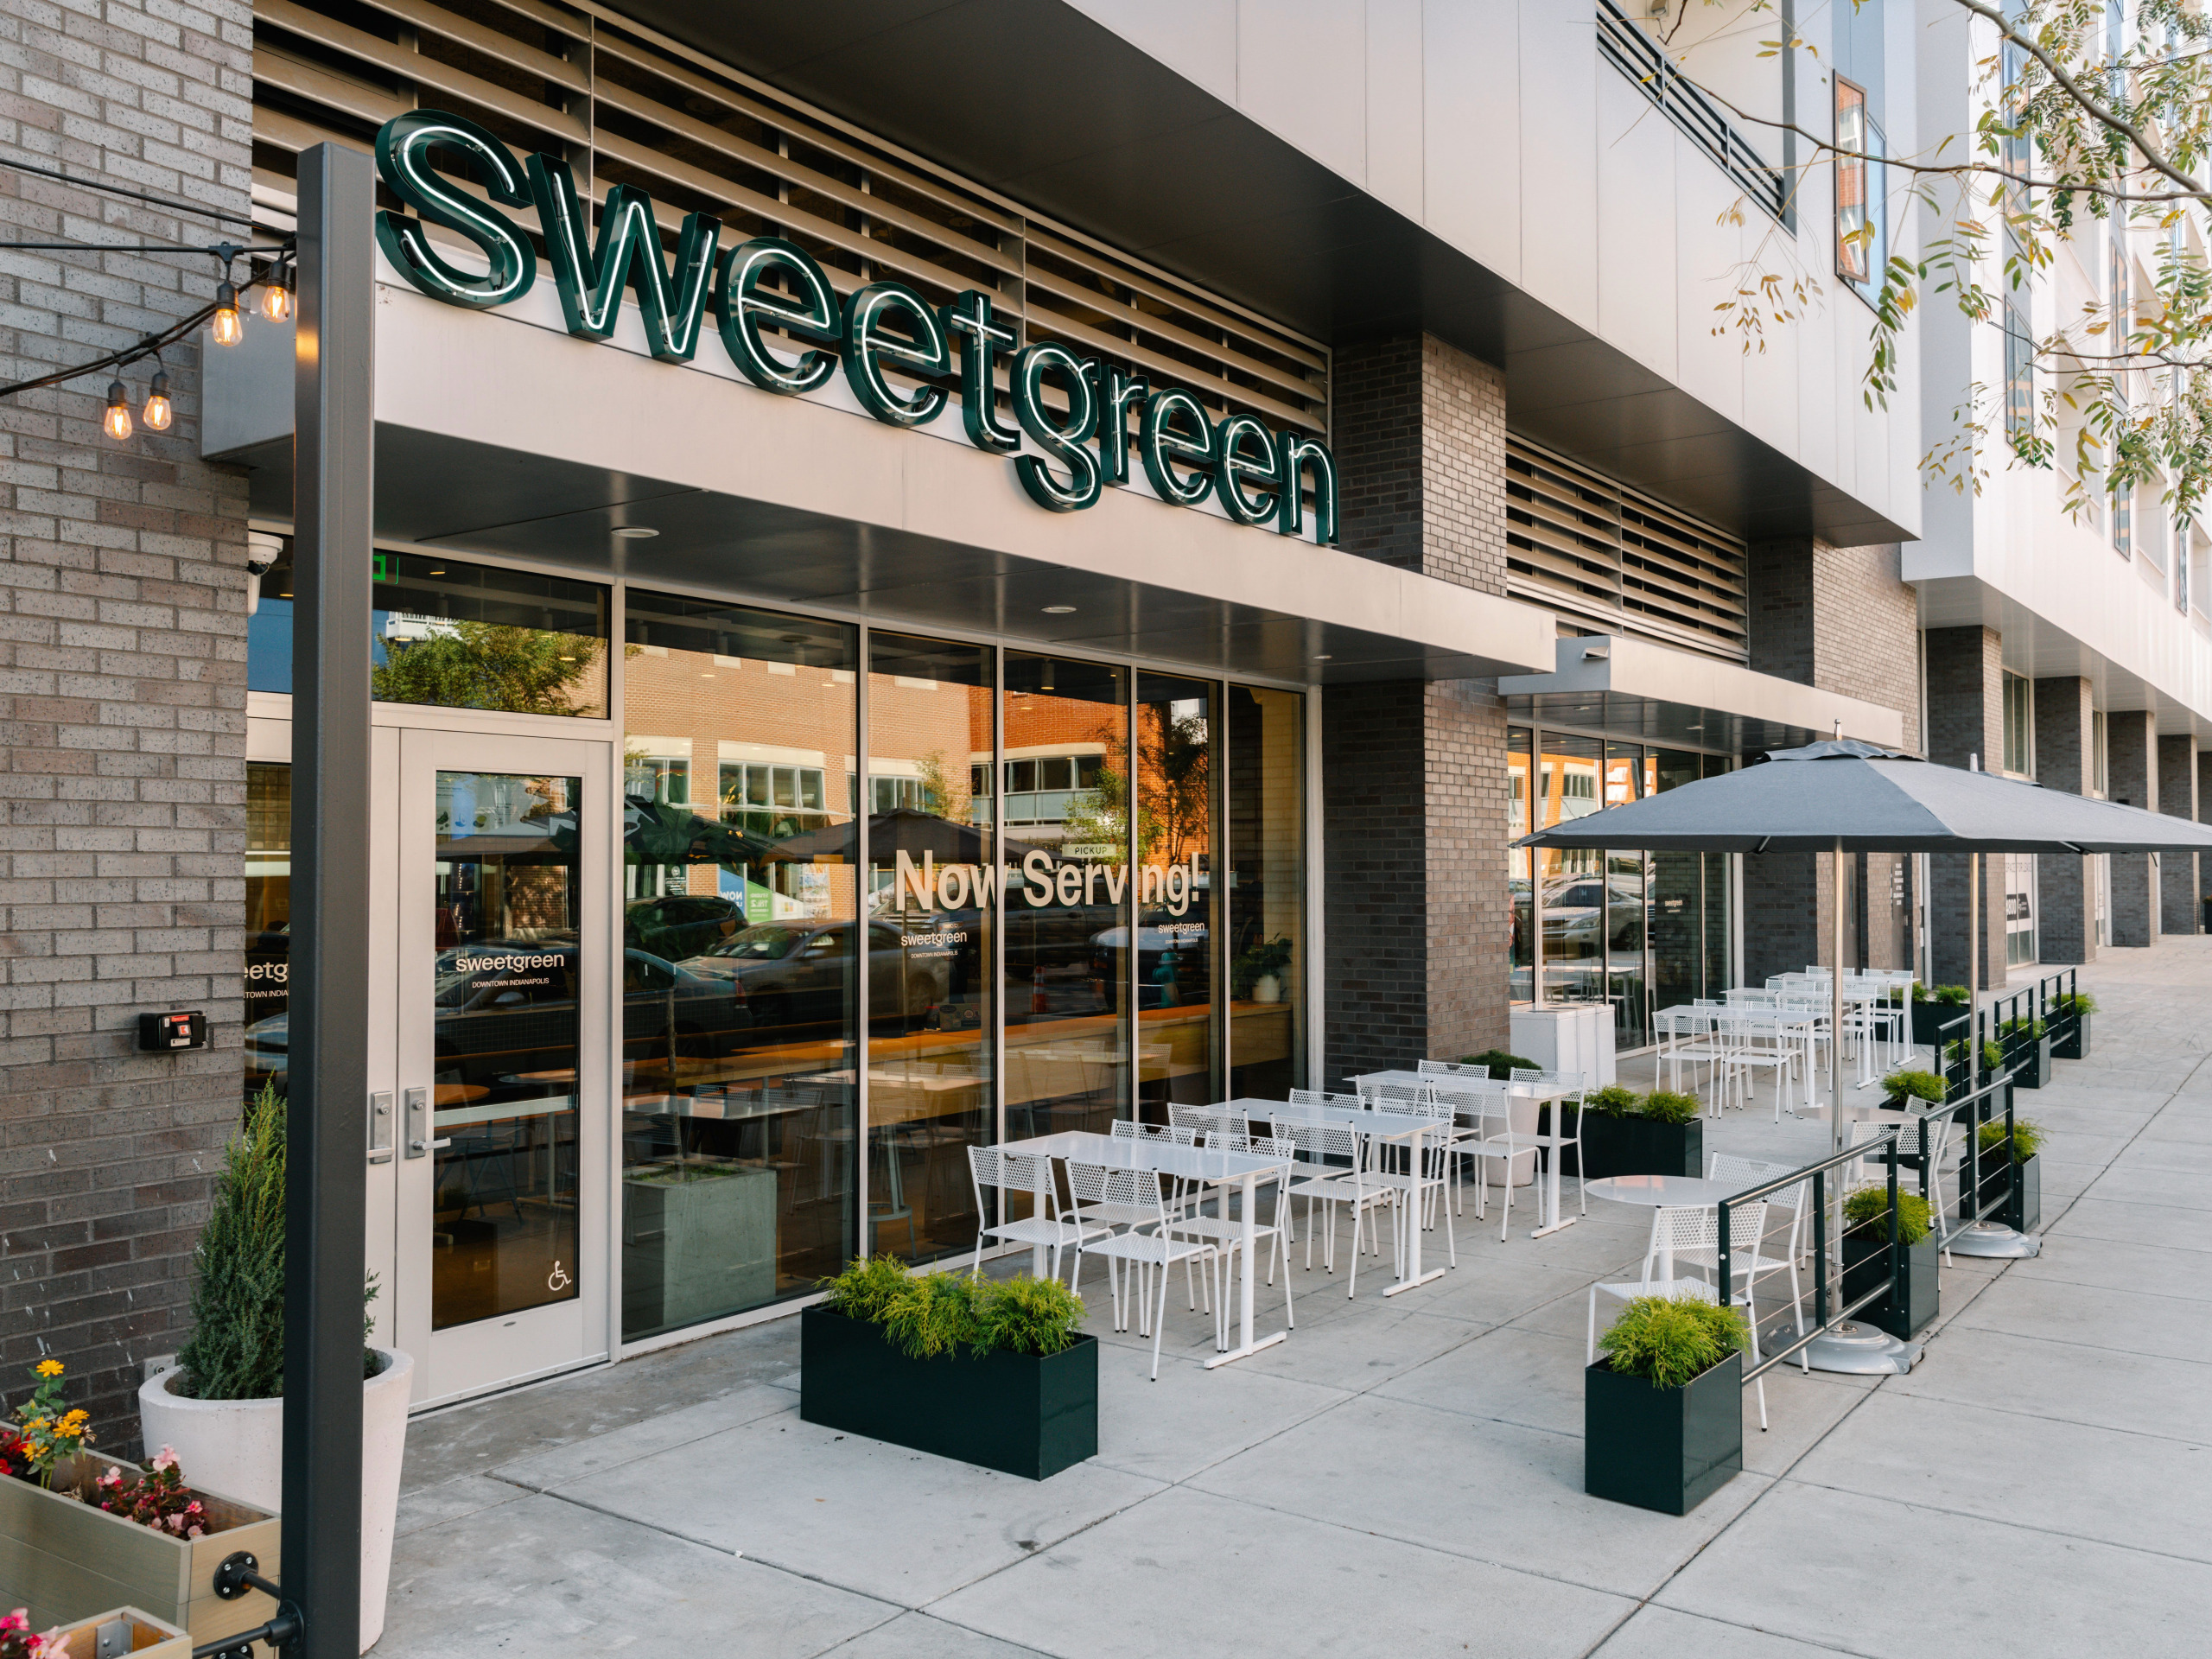 Downtown Sweetgreen opening as company's 2nd Indiana restaurant – Indianapolis Business Journal